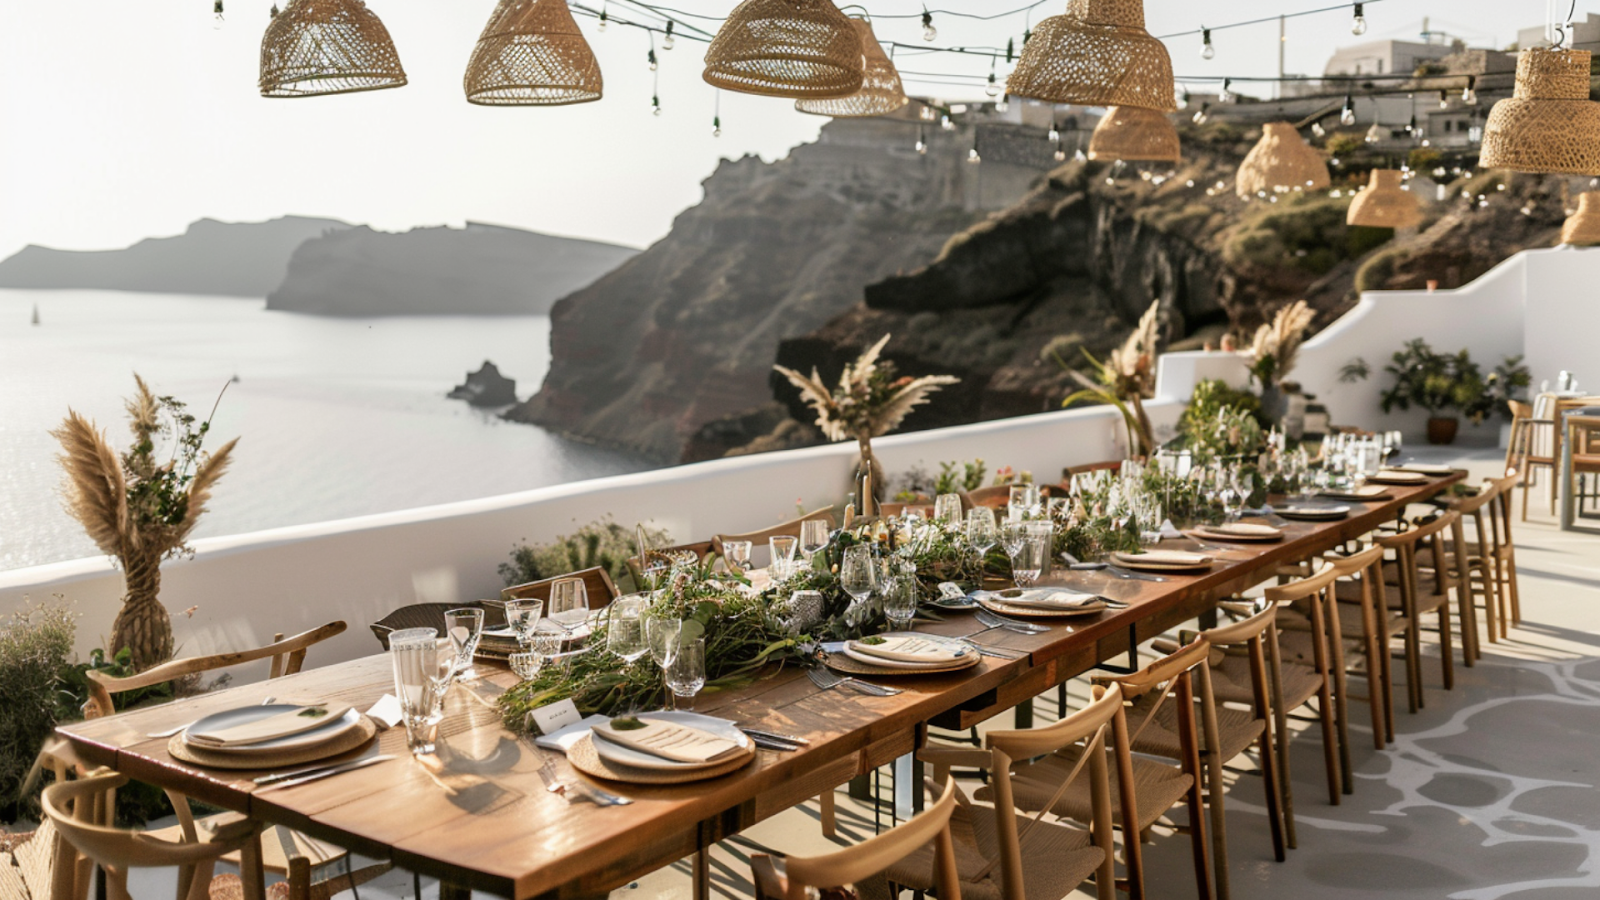 A table setting for a wedding reception in Santorini.
